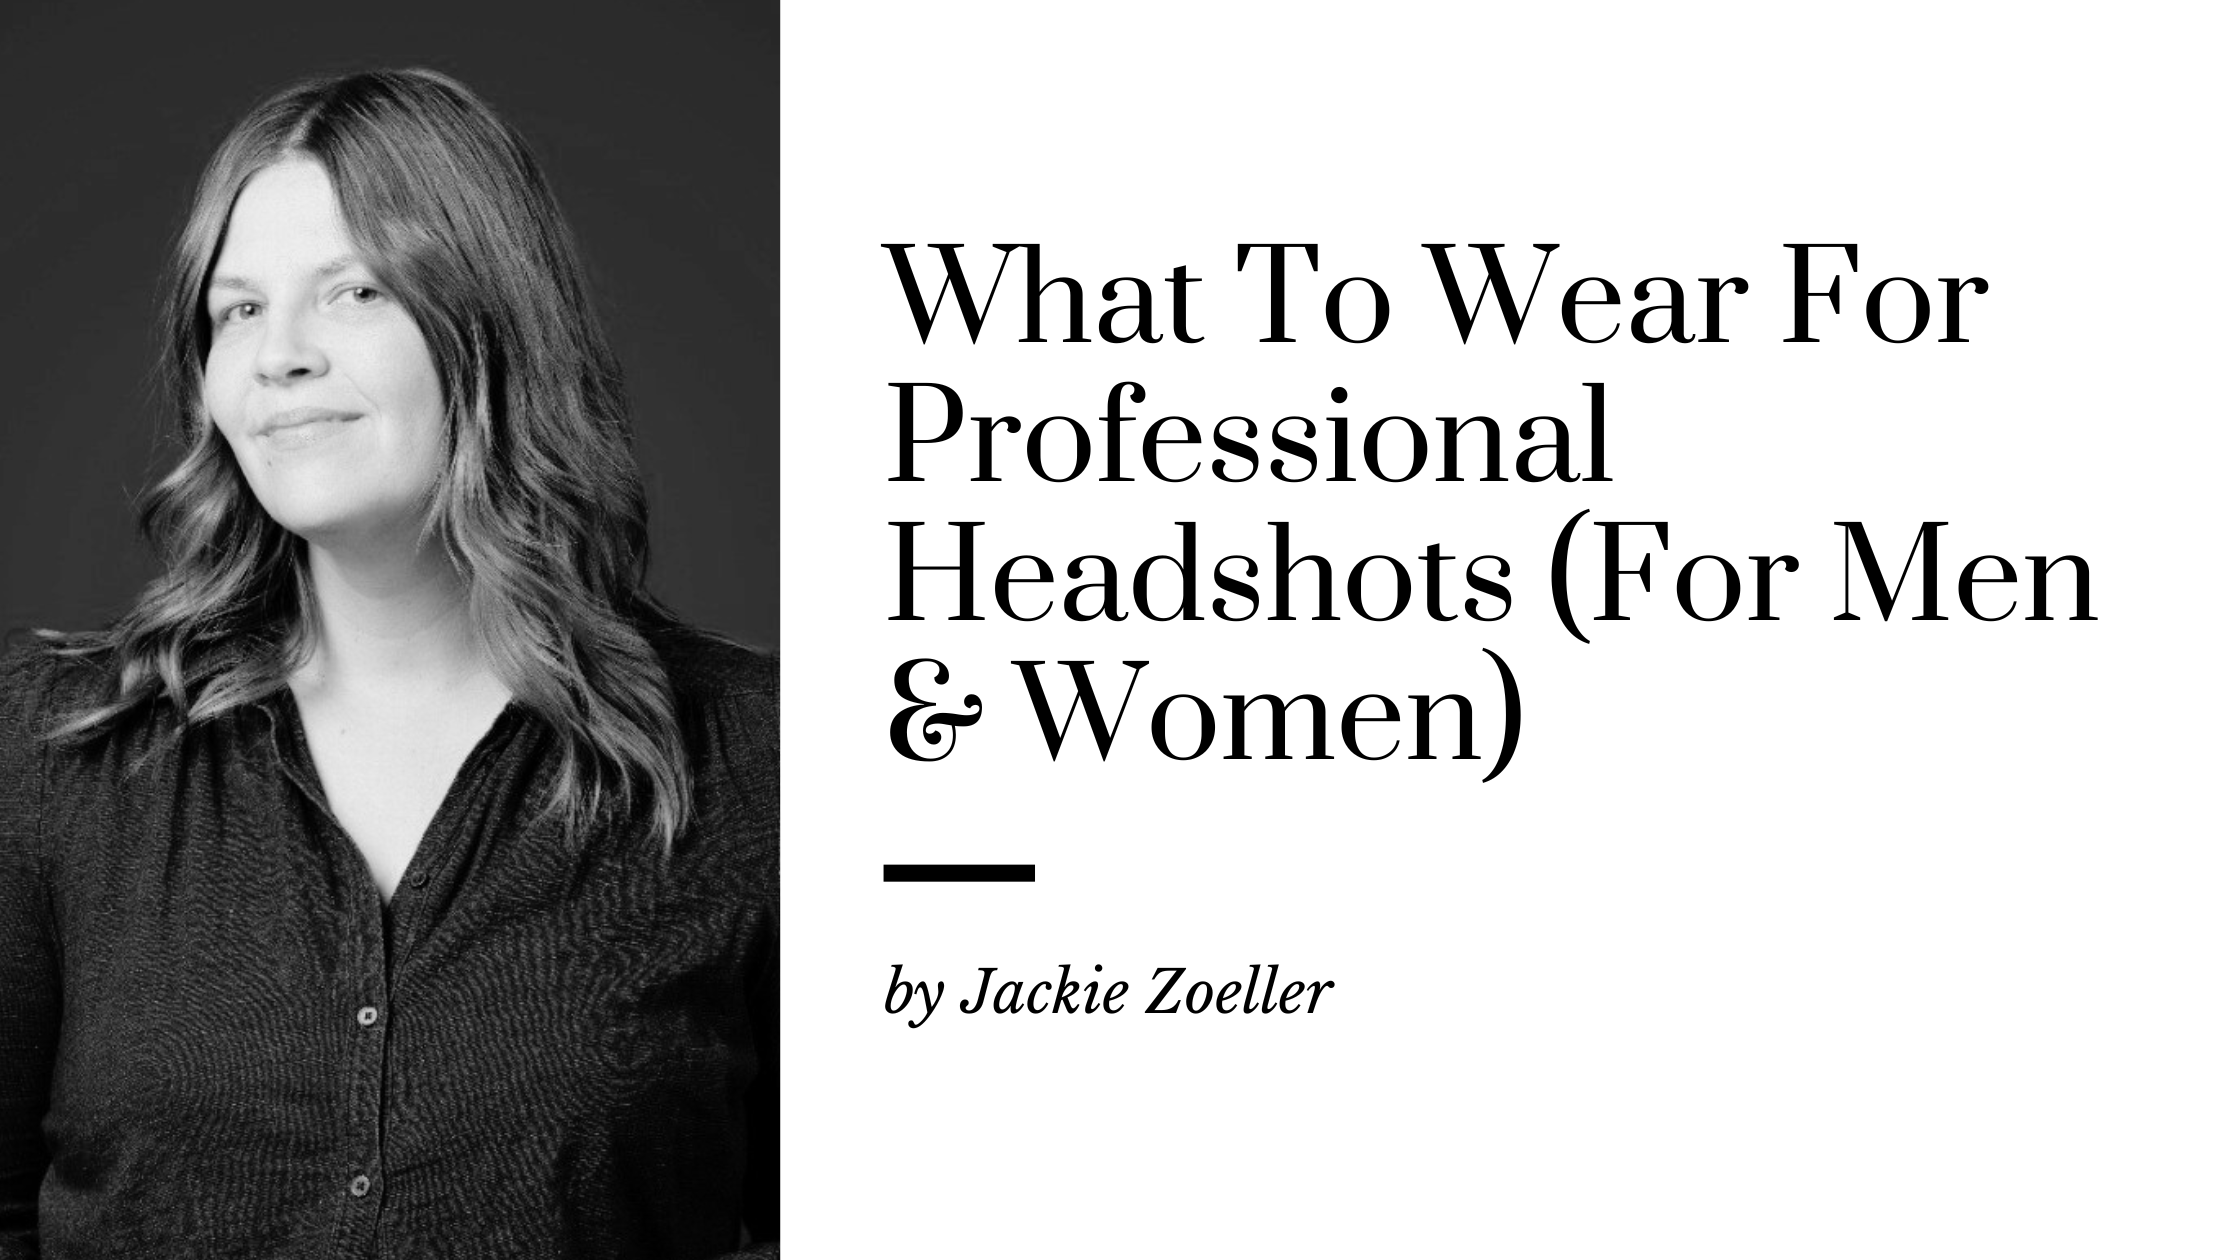 What To Wear For Professional Headshots (For Women & Men)